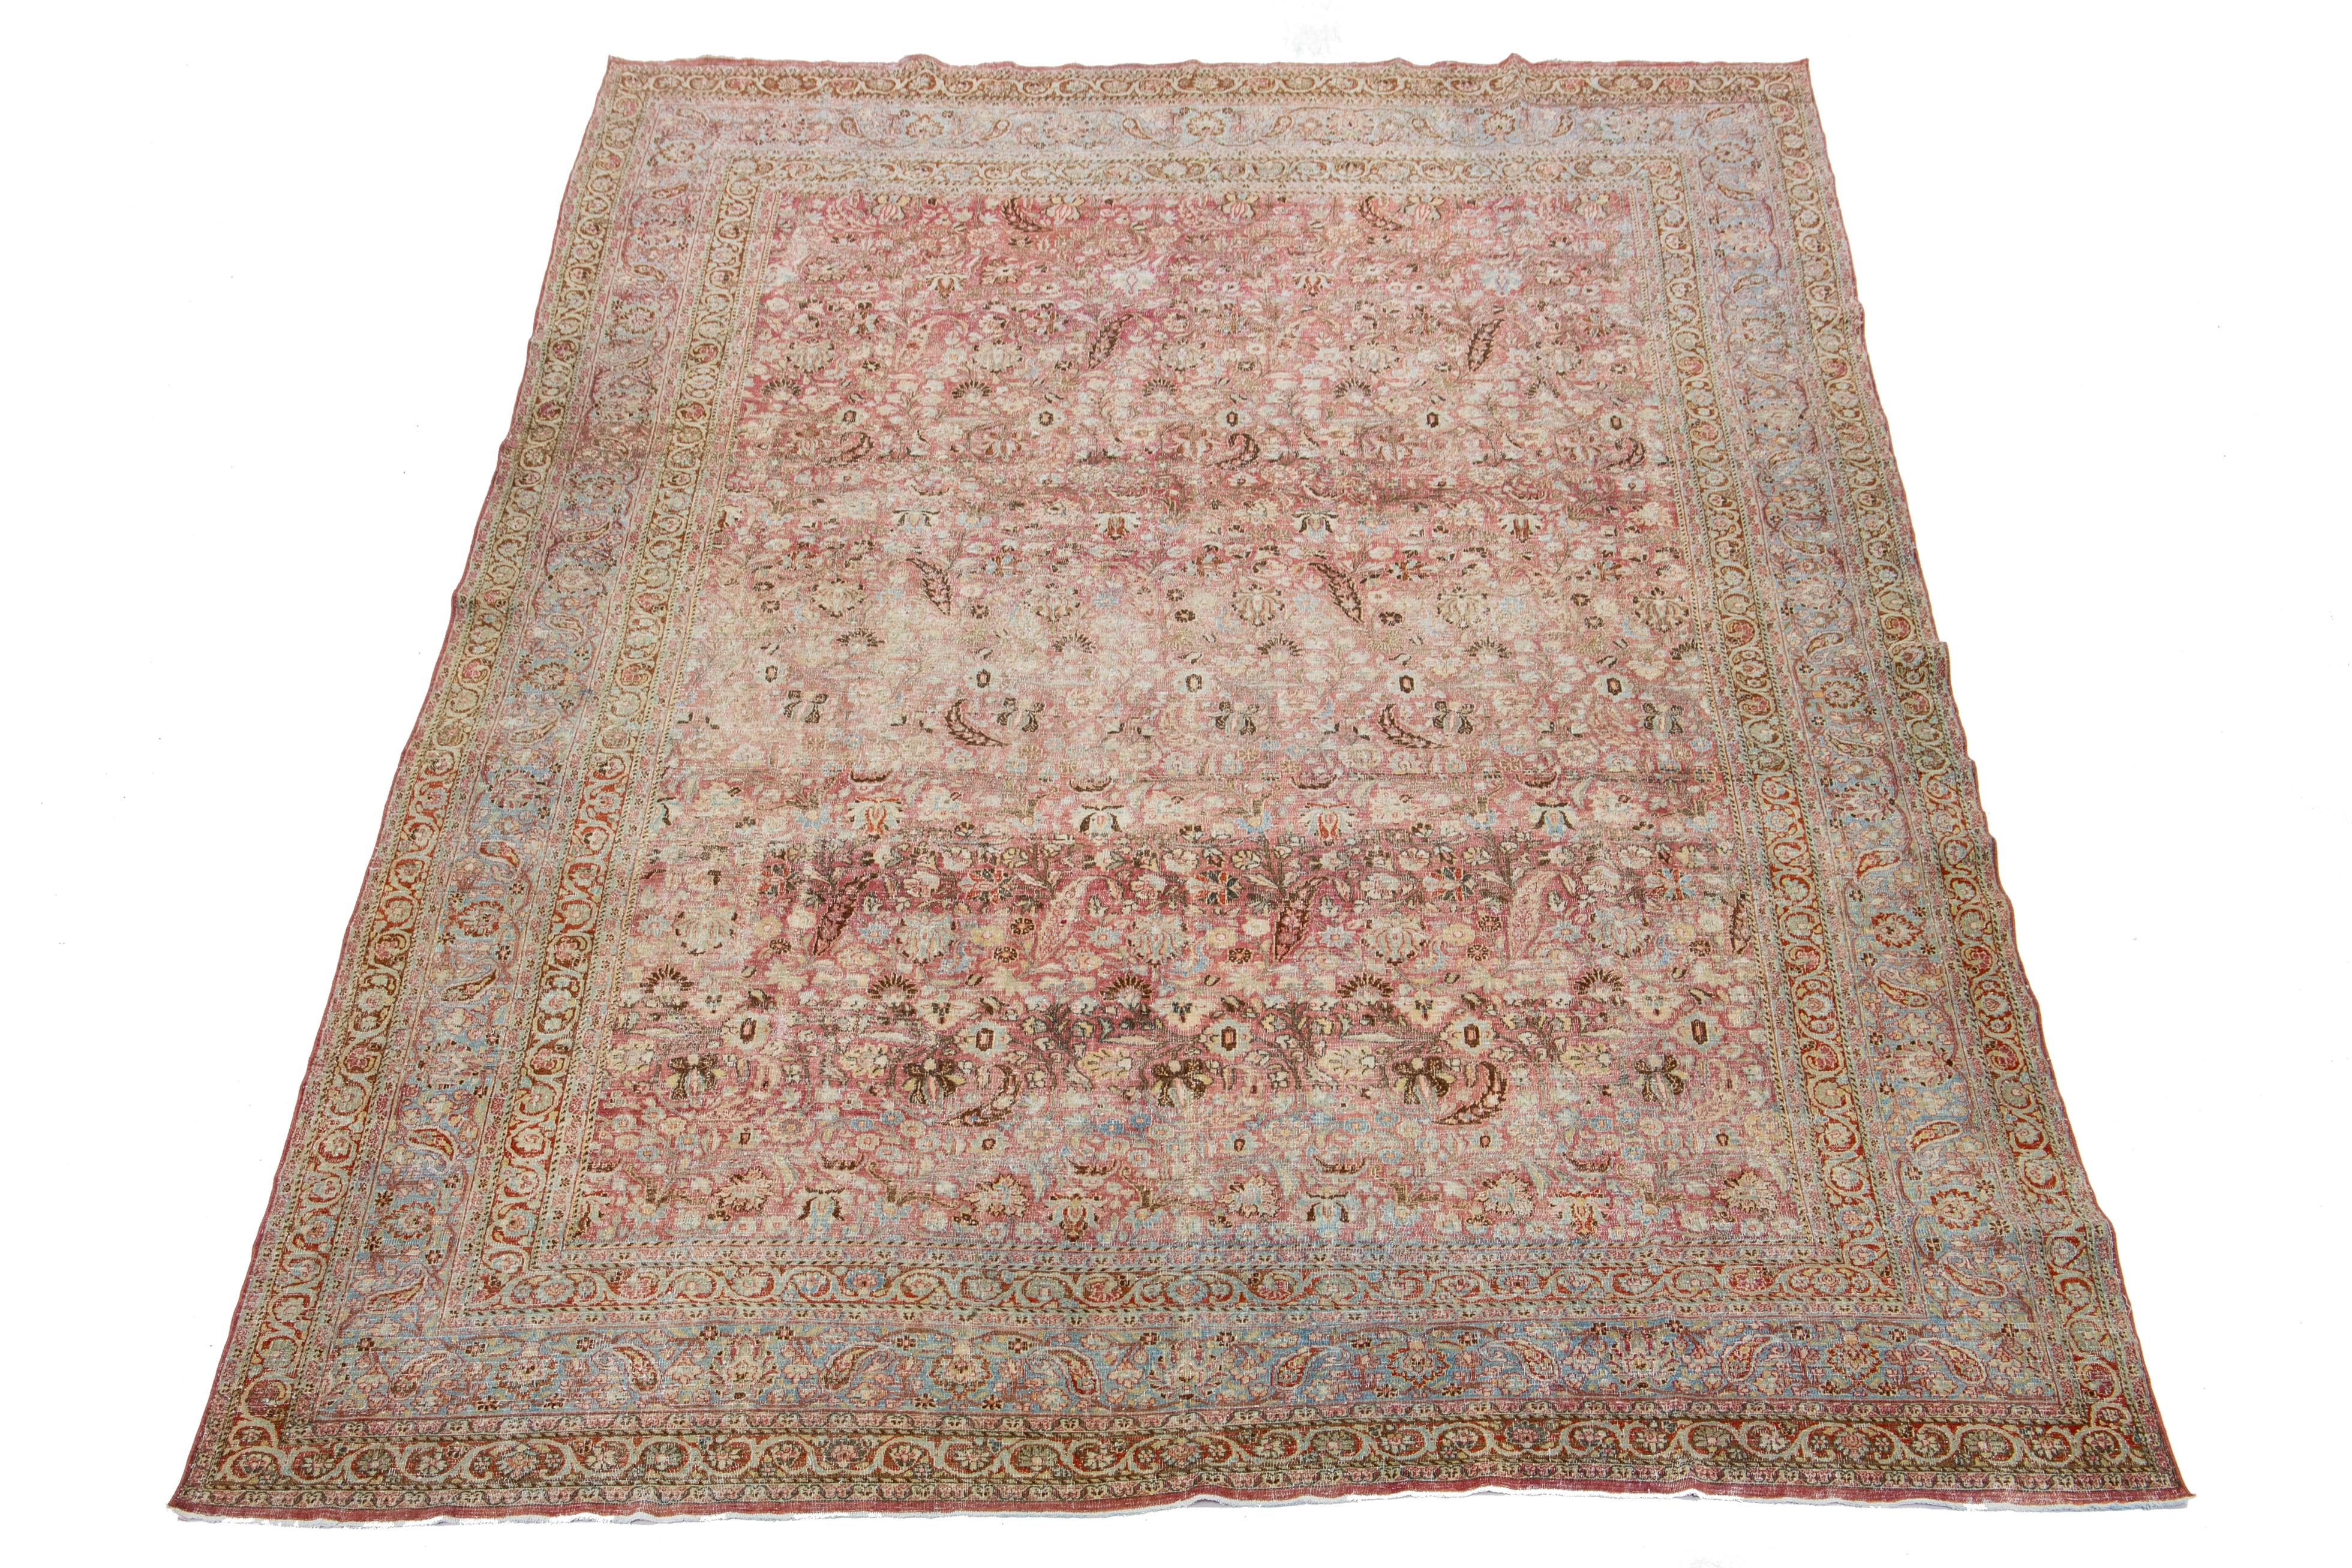 Beautiful Antique Mashad hand-knotted wool rug with a red color field. This Persian rug has a blue frame with multicolor accents in a gorgeous, classic floral design. 

This rug measures 9'9